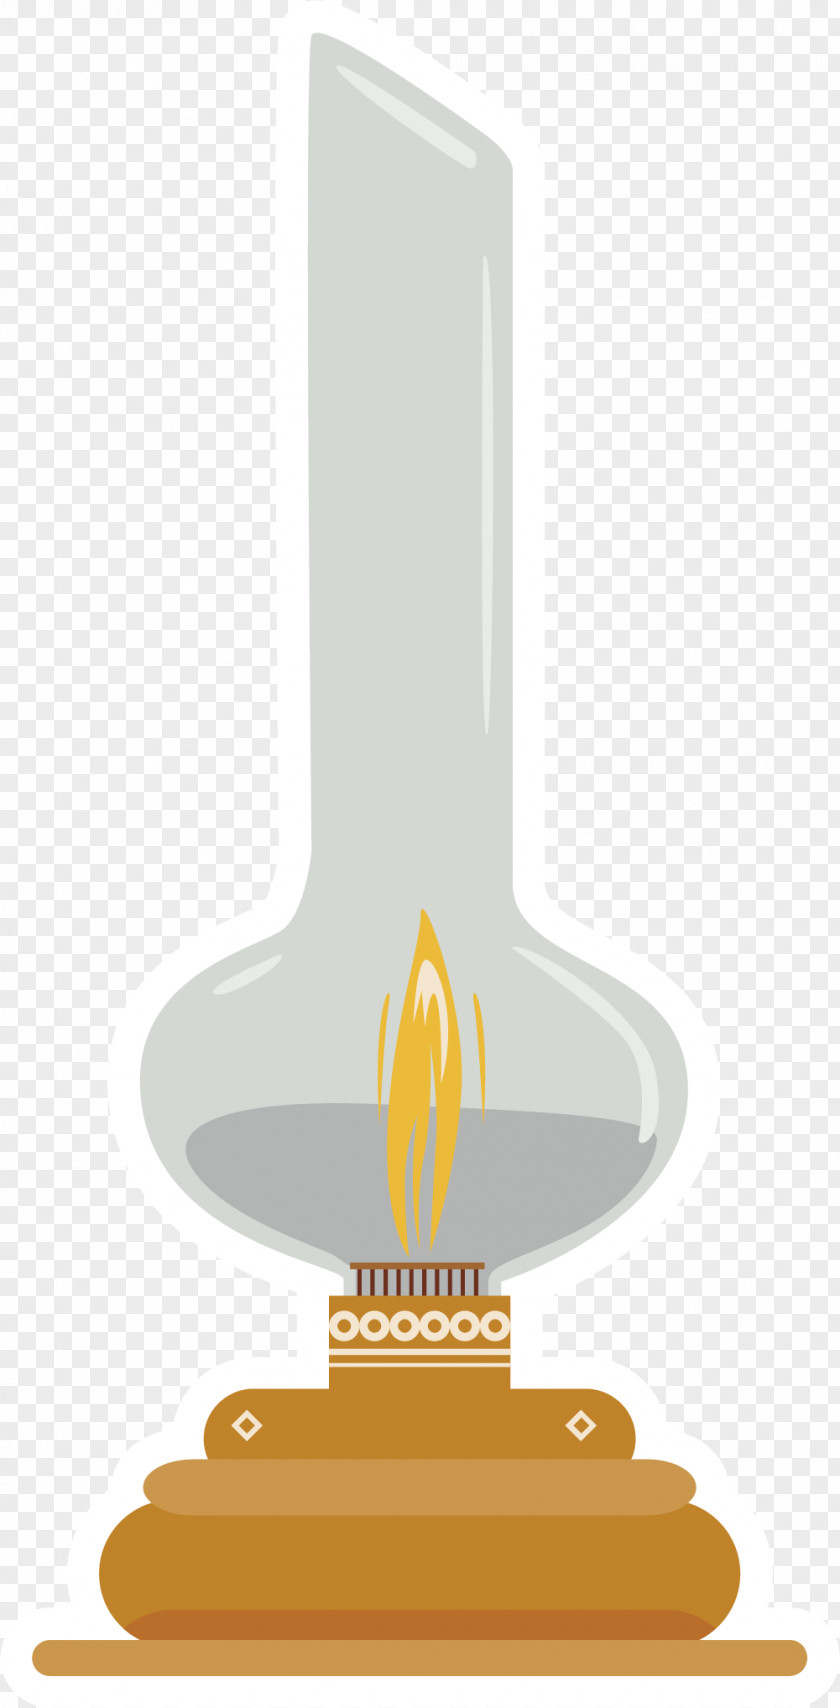 Simple Oil Lamp For Eid UL Fitr Light Fixture Electric PNG